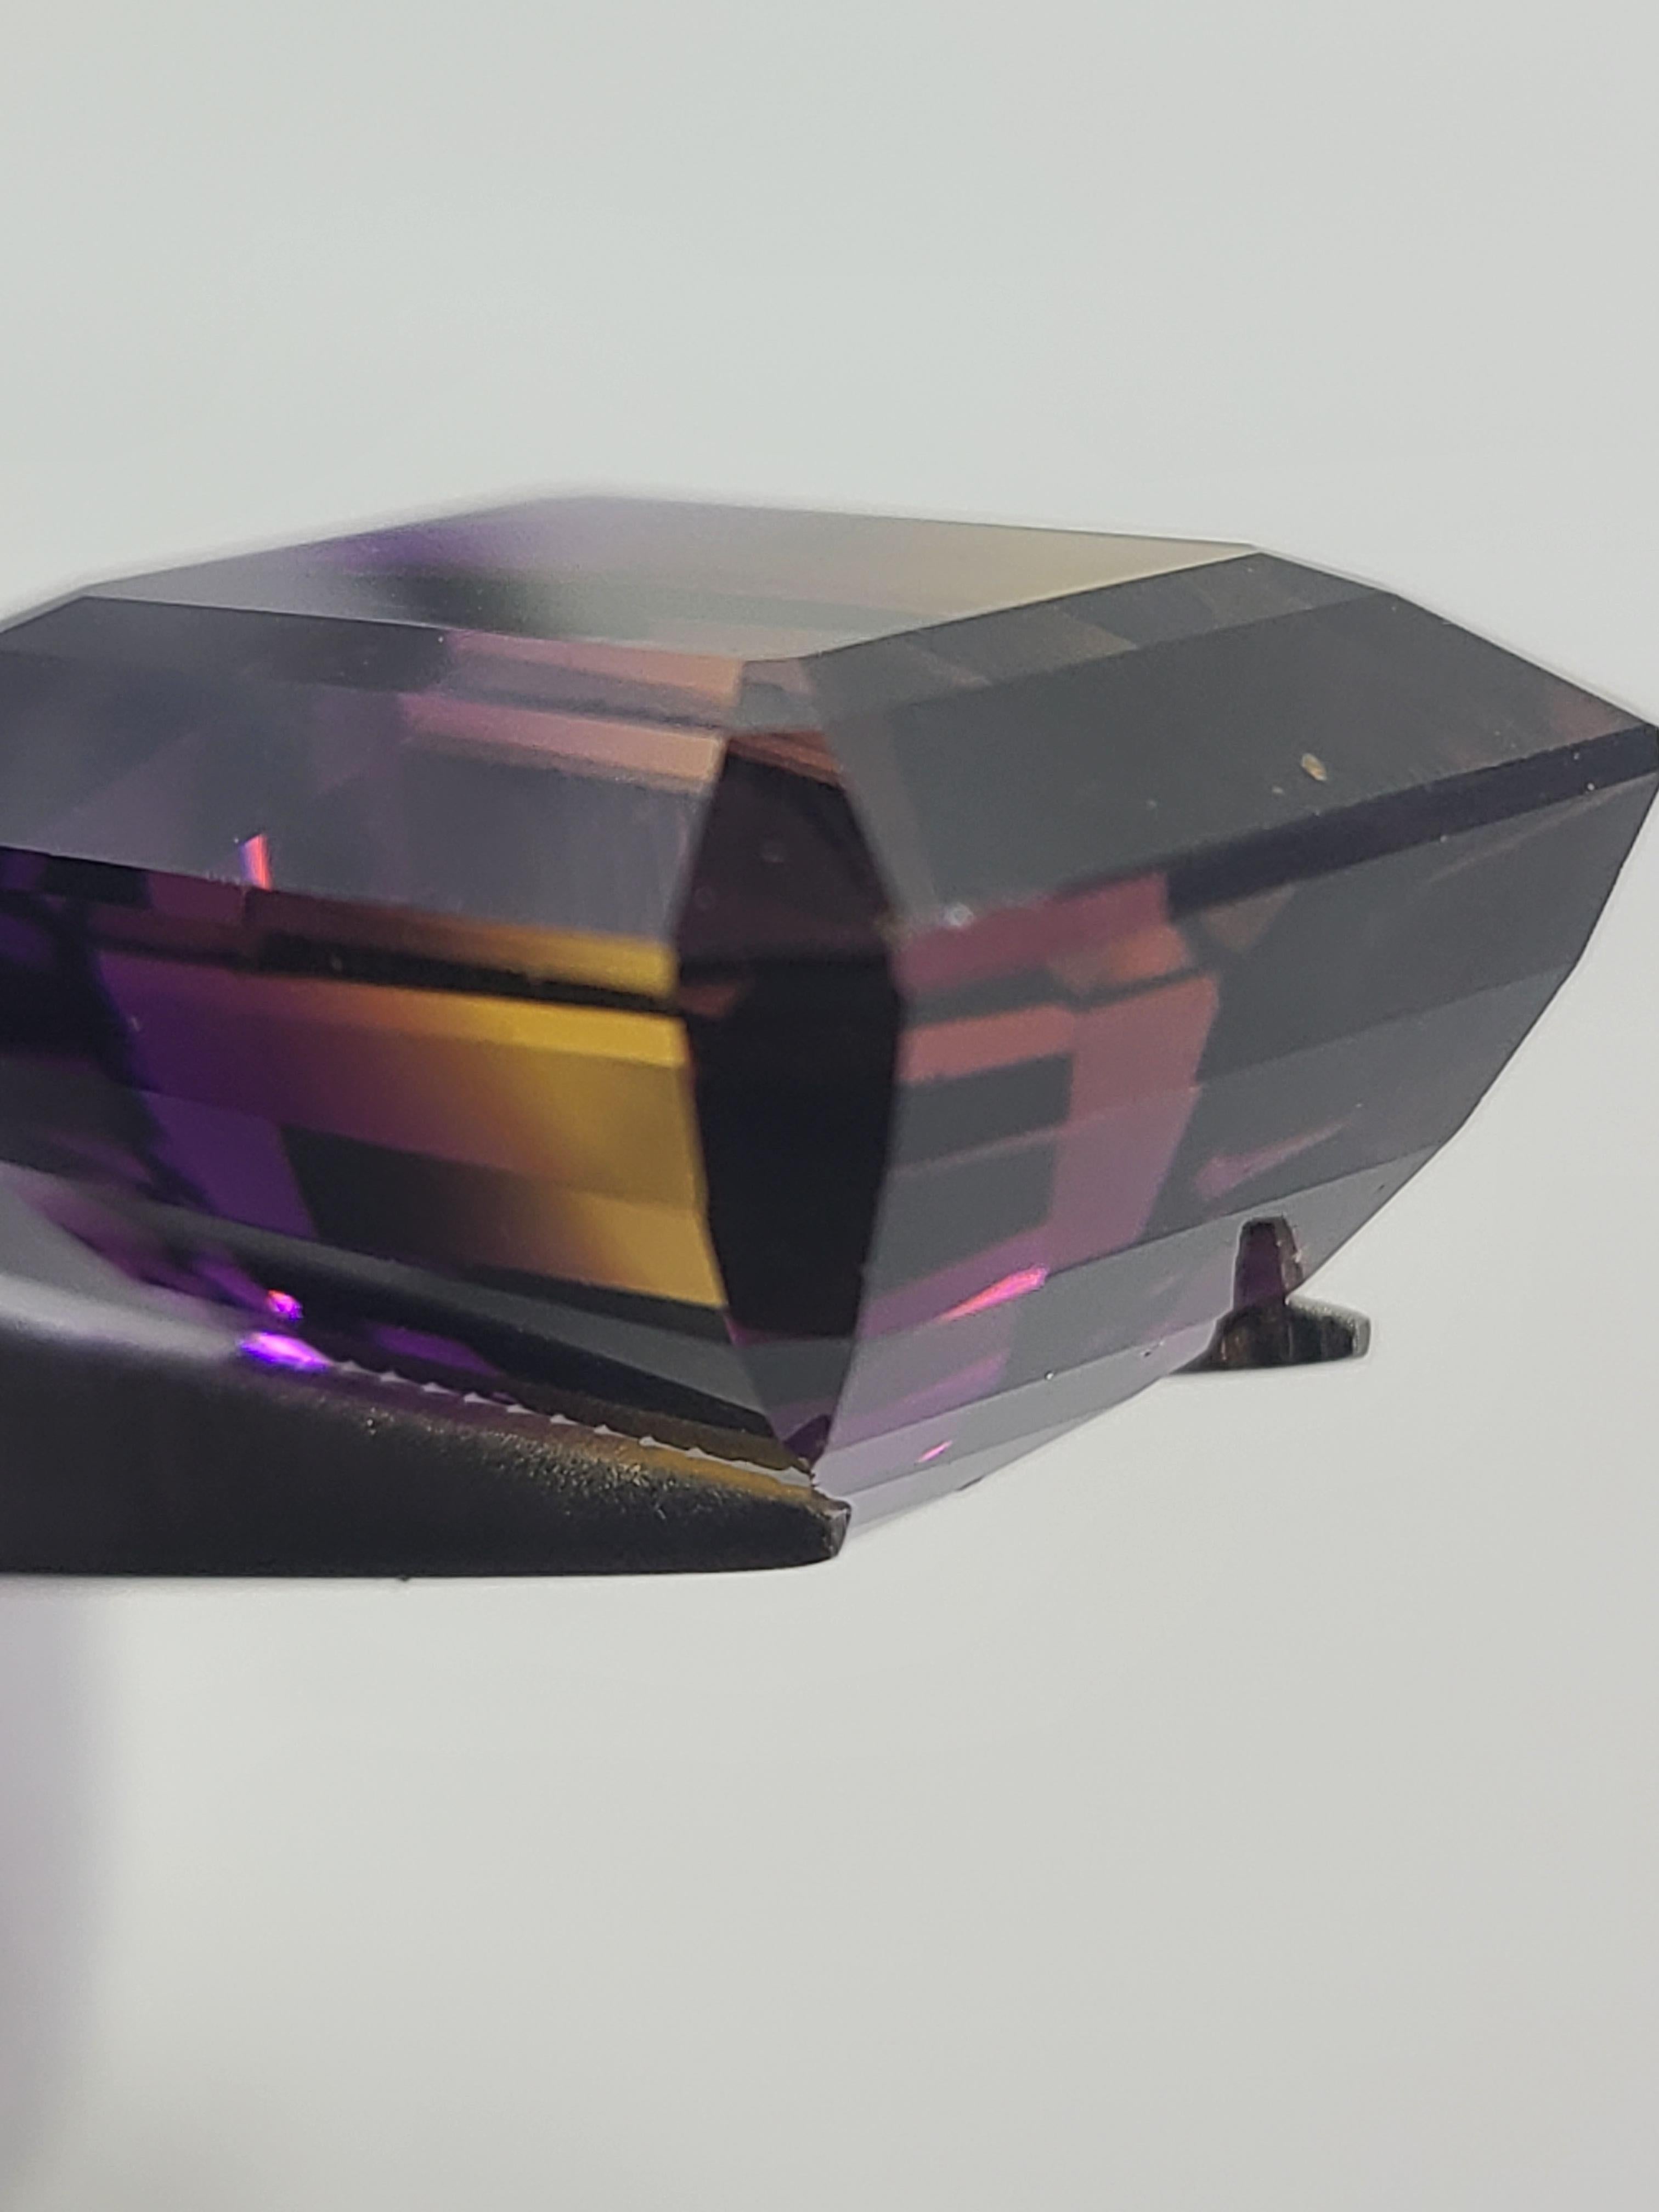 This EXTRA LARGE emerald cut (rectangular step cut) ametrine exhibits its distinctive bi-colorism with rich purple (amethyst) blending into a sunshine yellow (citrine).  A must-have for those who love quartz!

This single loose stone measures 23.8mm